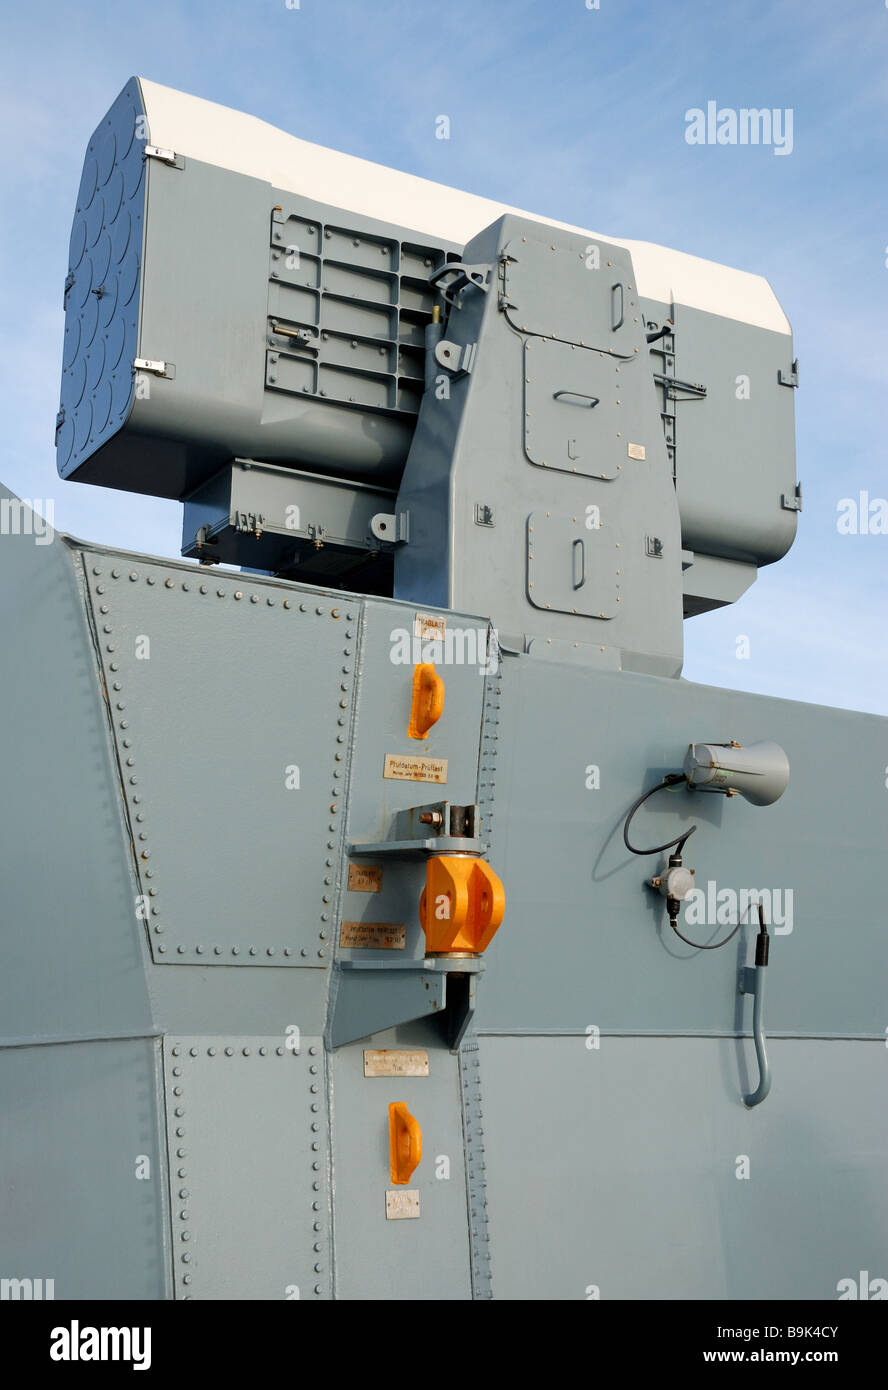 Cassete missile system on board a frigate Stock Photo